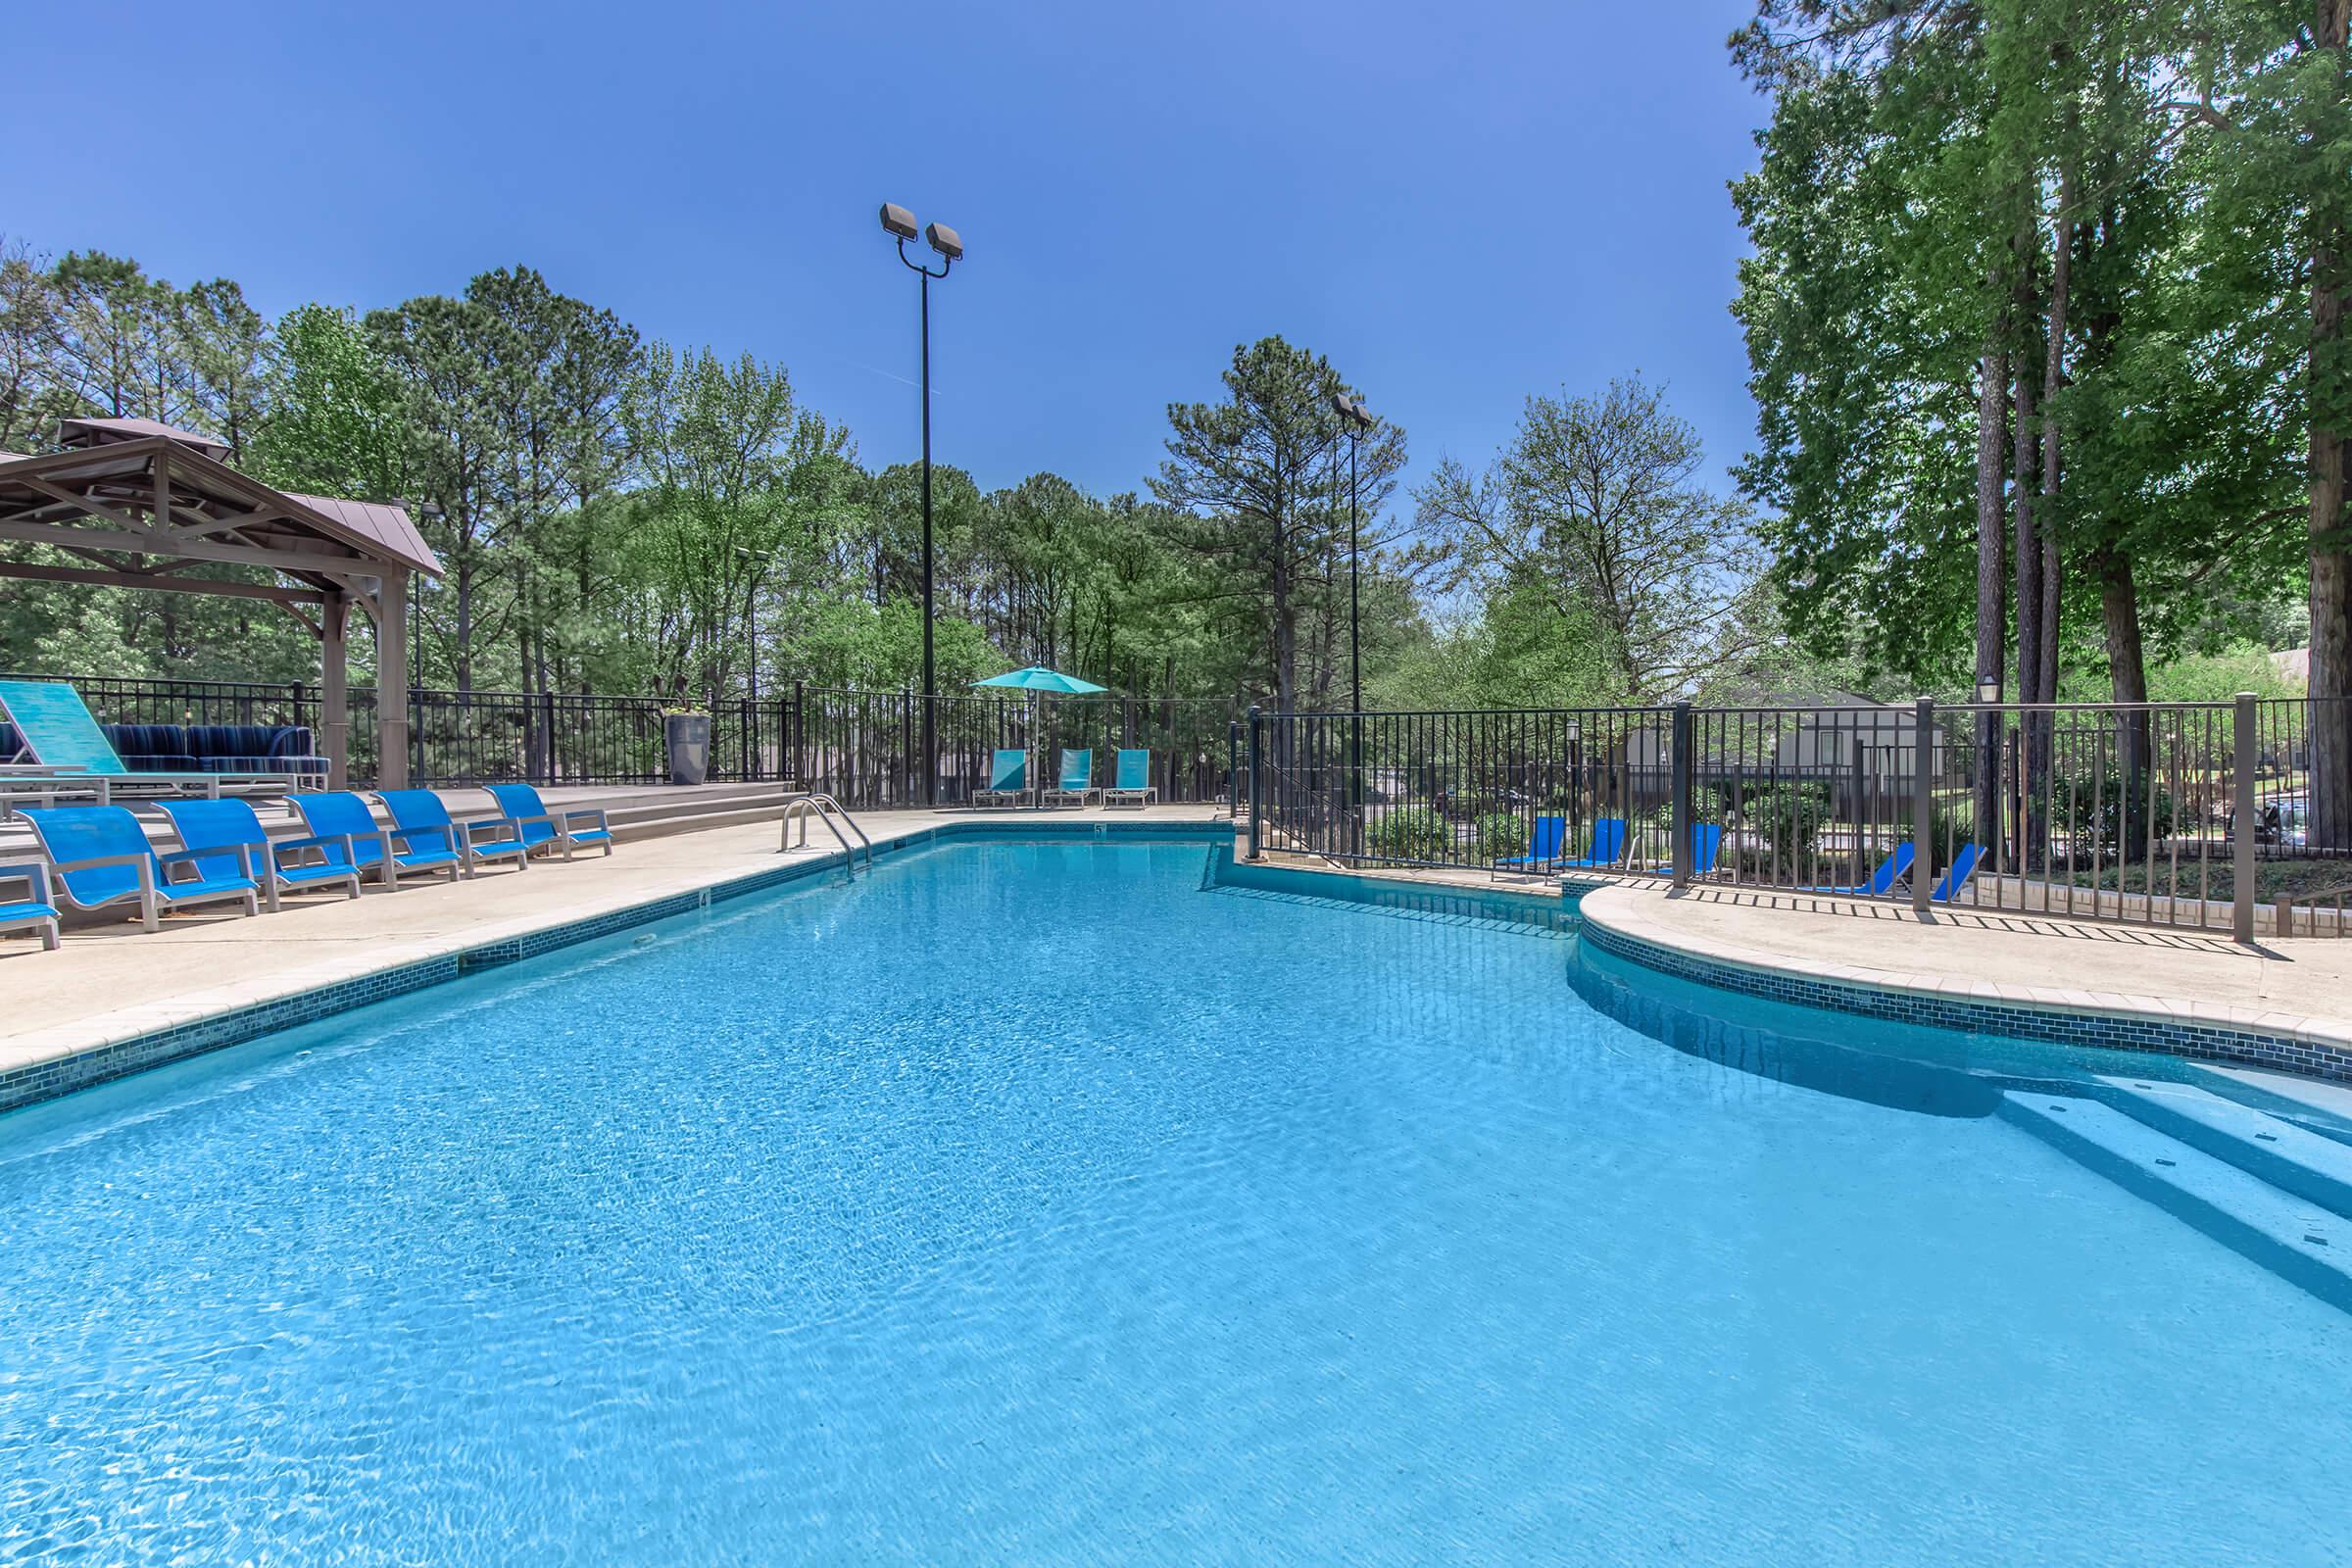 Take a dip in one of the shimmering swimming pools at Madison Landing at Research in Madison, AL